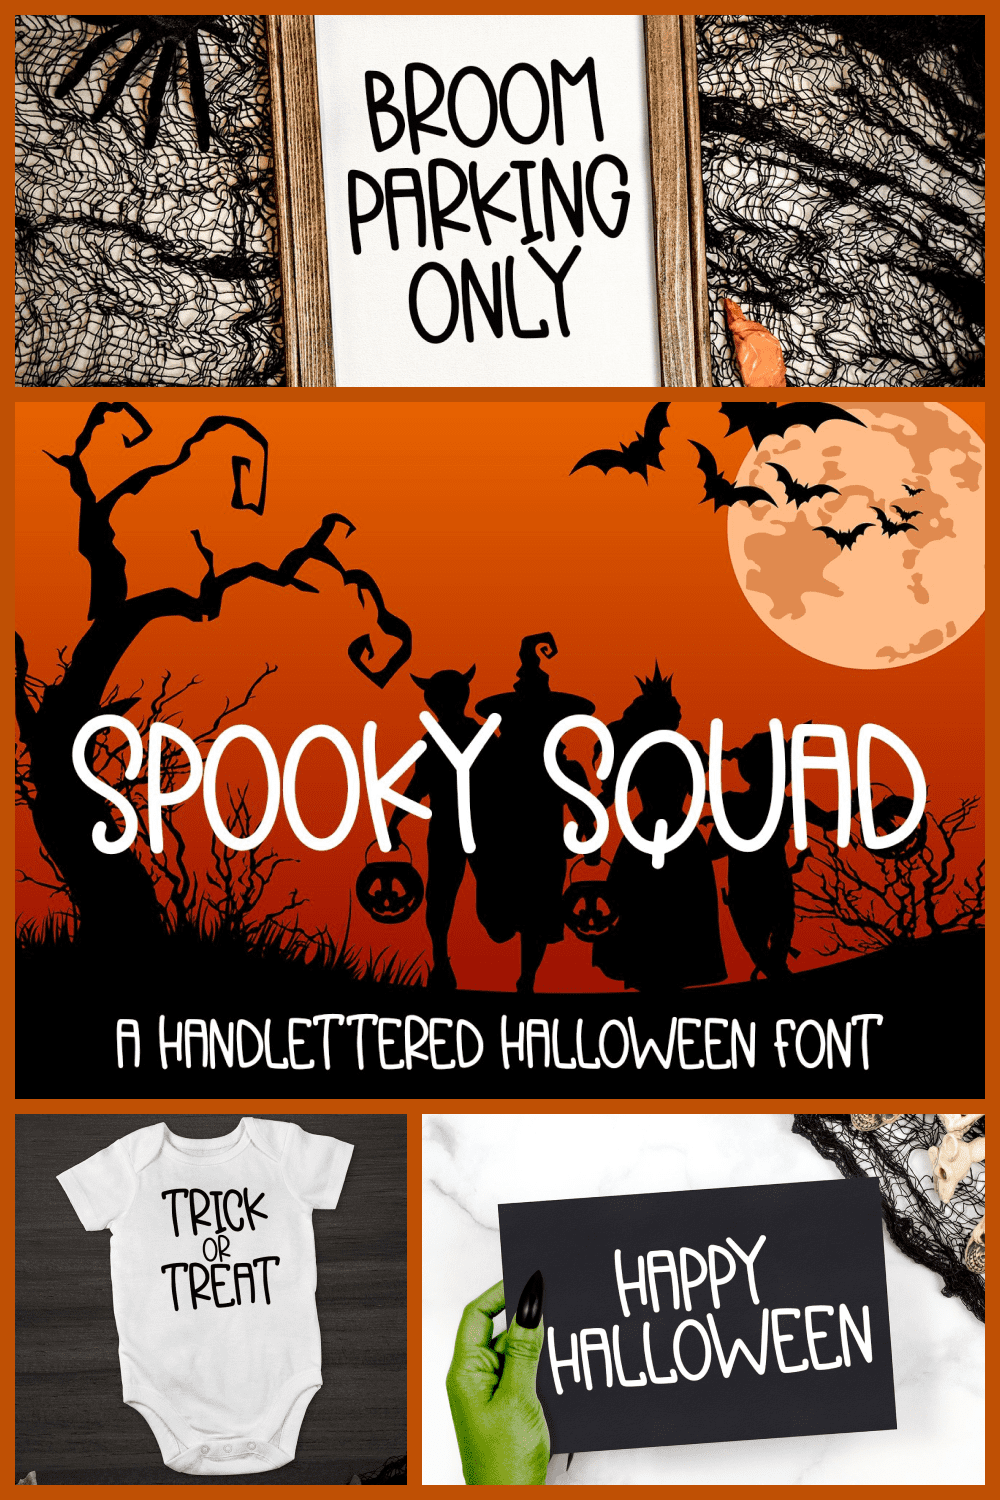 Spooky Squad - A Hand-Lettered Halloween Script.